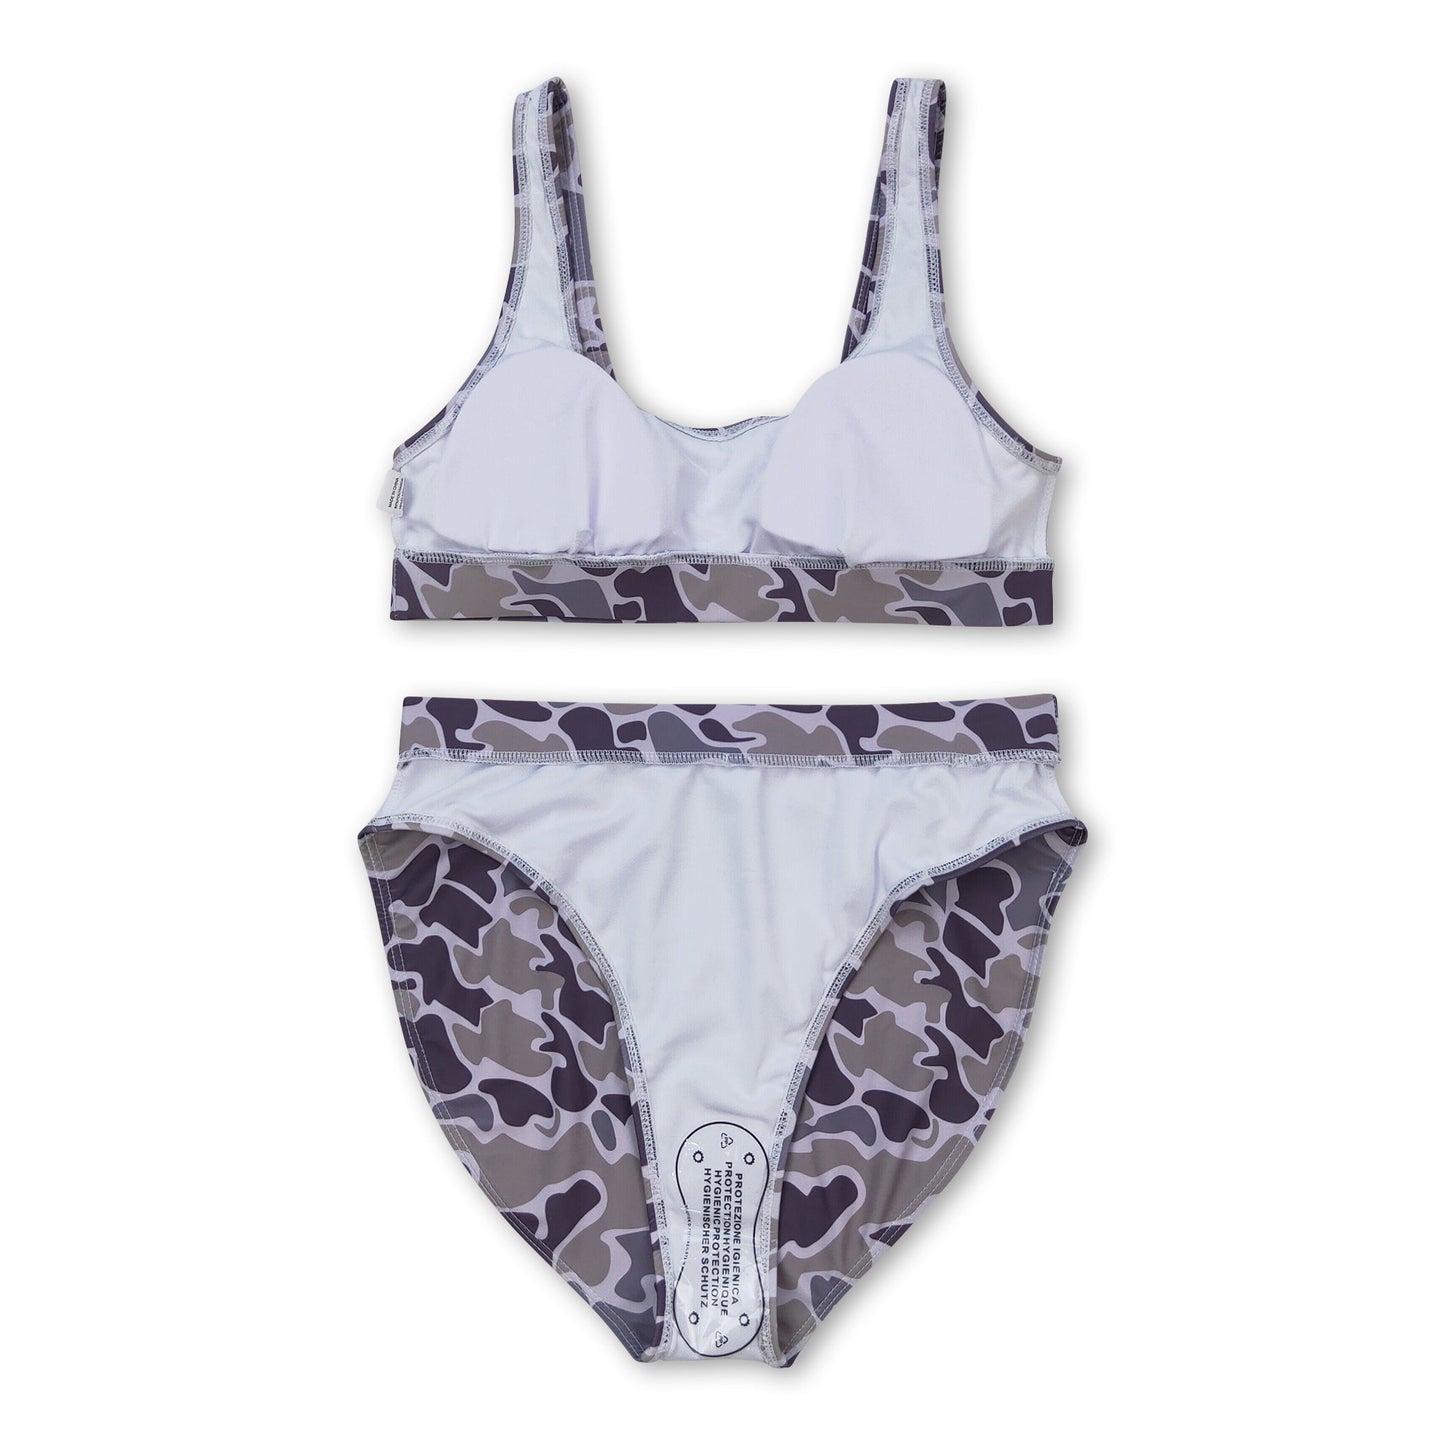 Camo print mommy and me women summer swimsuit